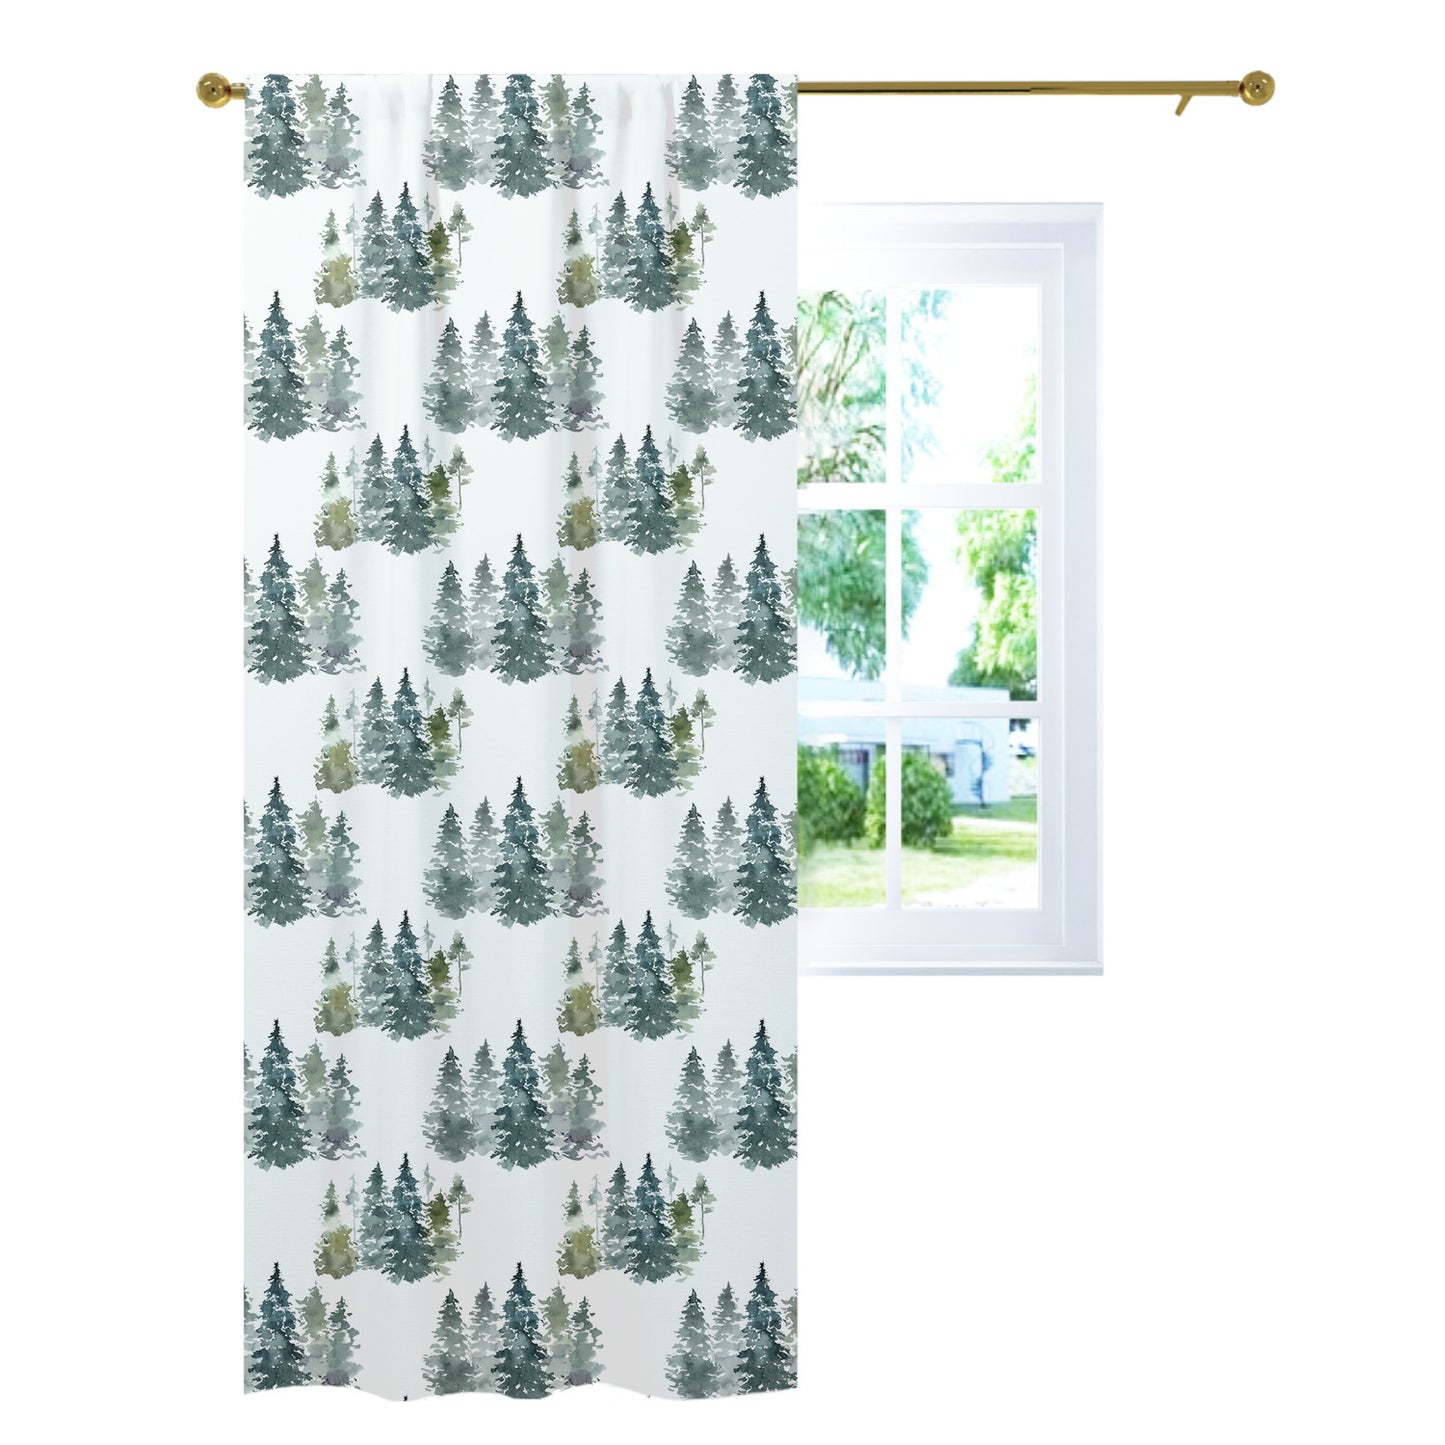 Pine Trees Curtain Single Panel, Forest Nursery Decor - Majestic Forest